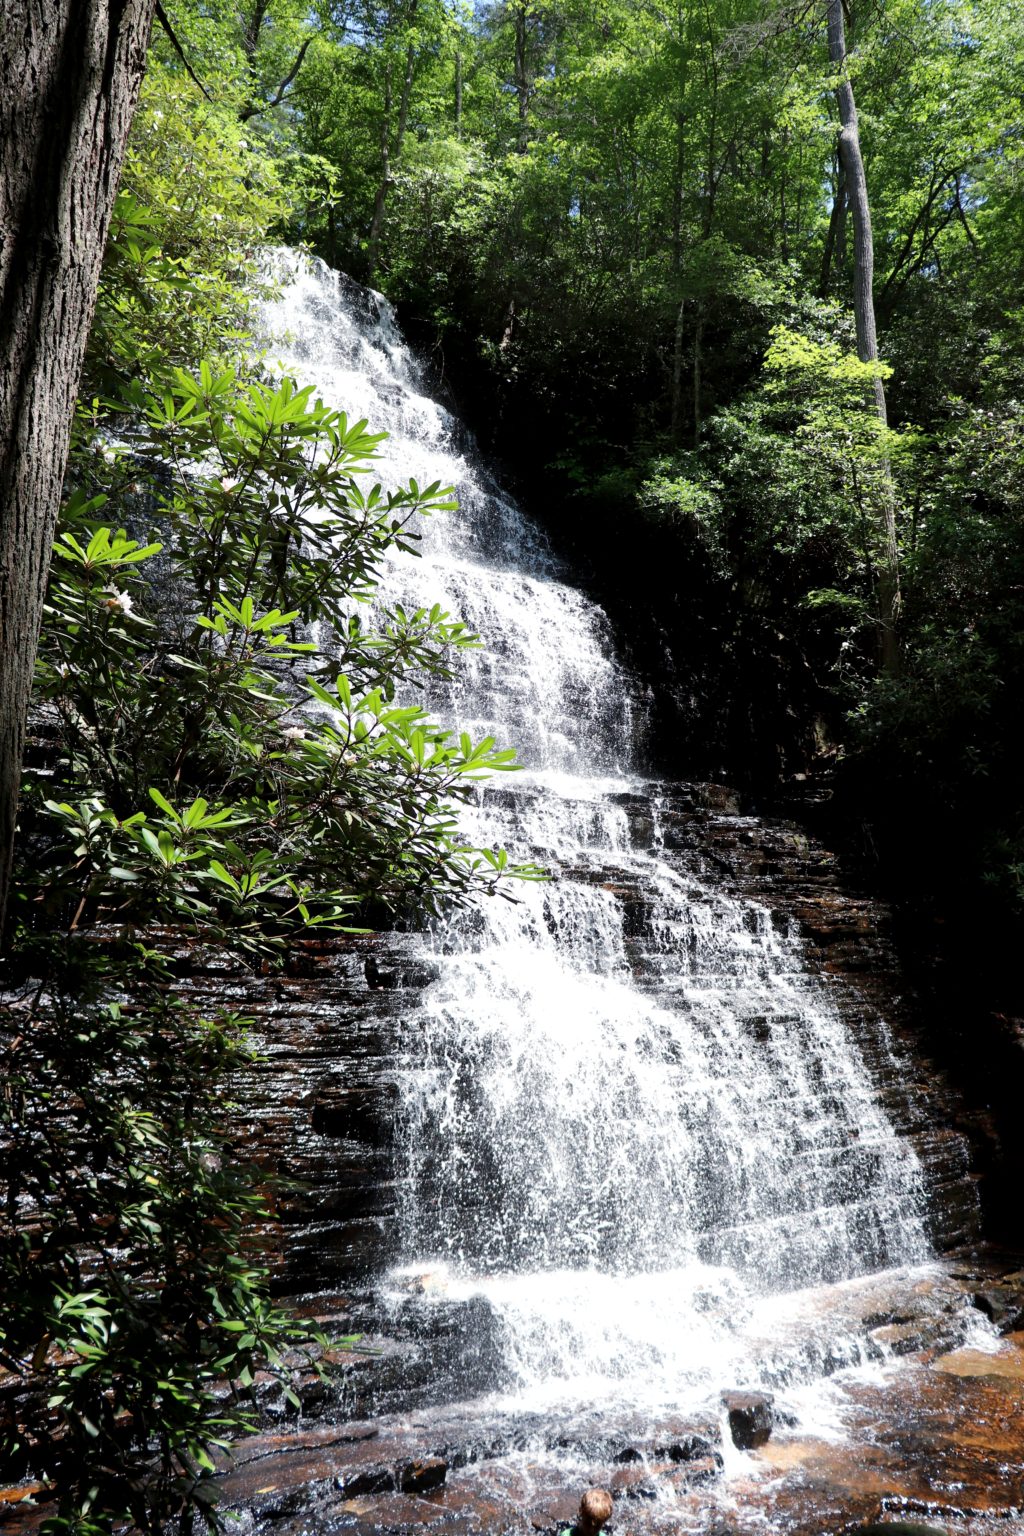 Benton Falls: Easy Hike to see a Cascading Waterfall - Exploring Chatt